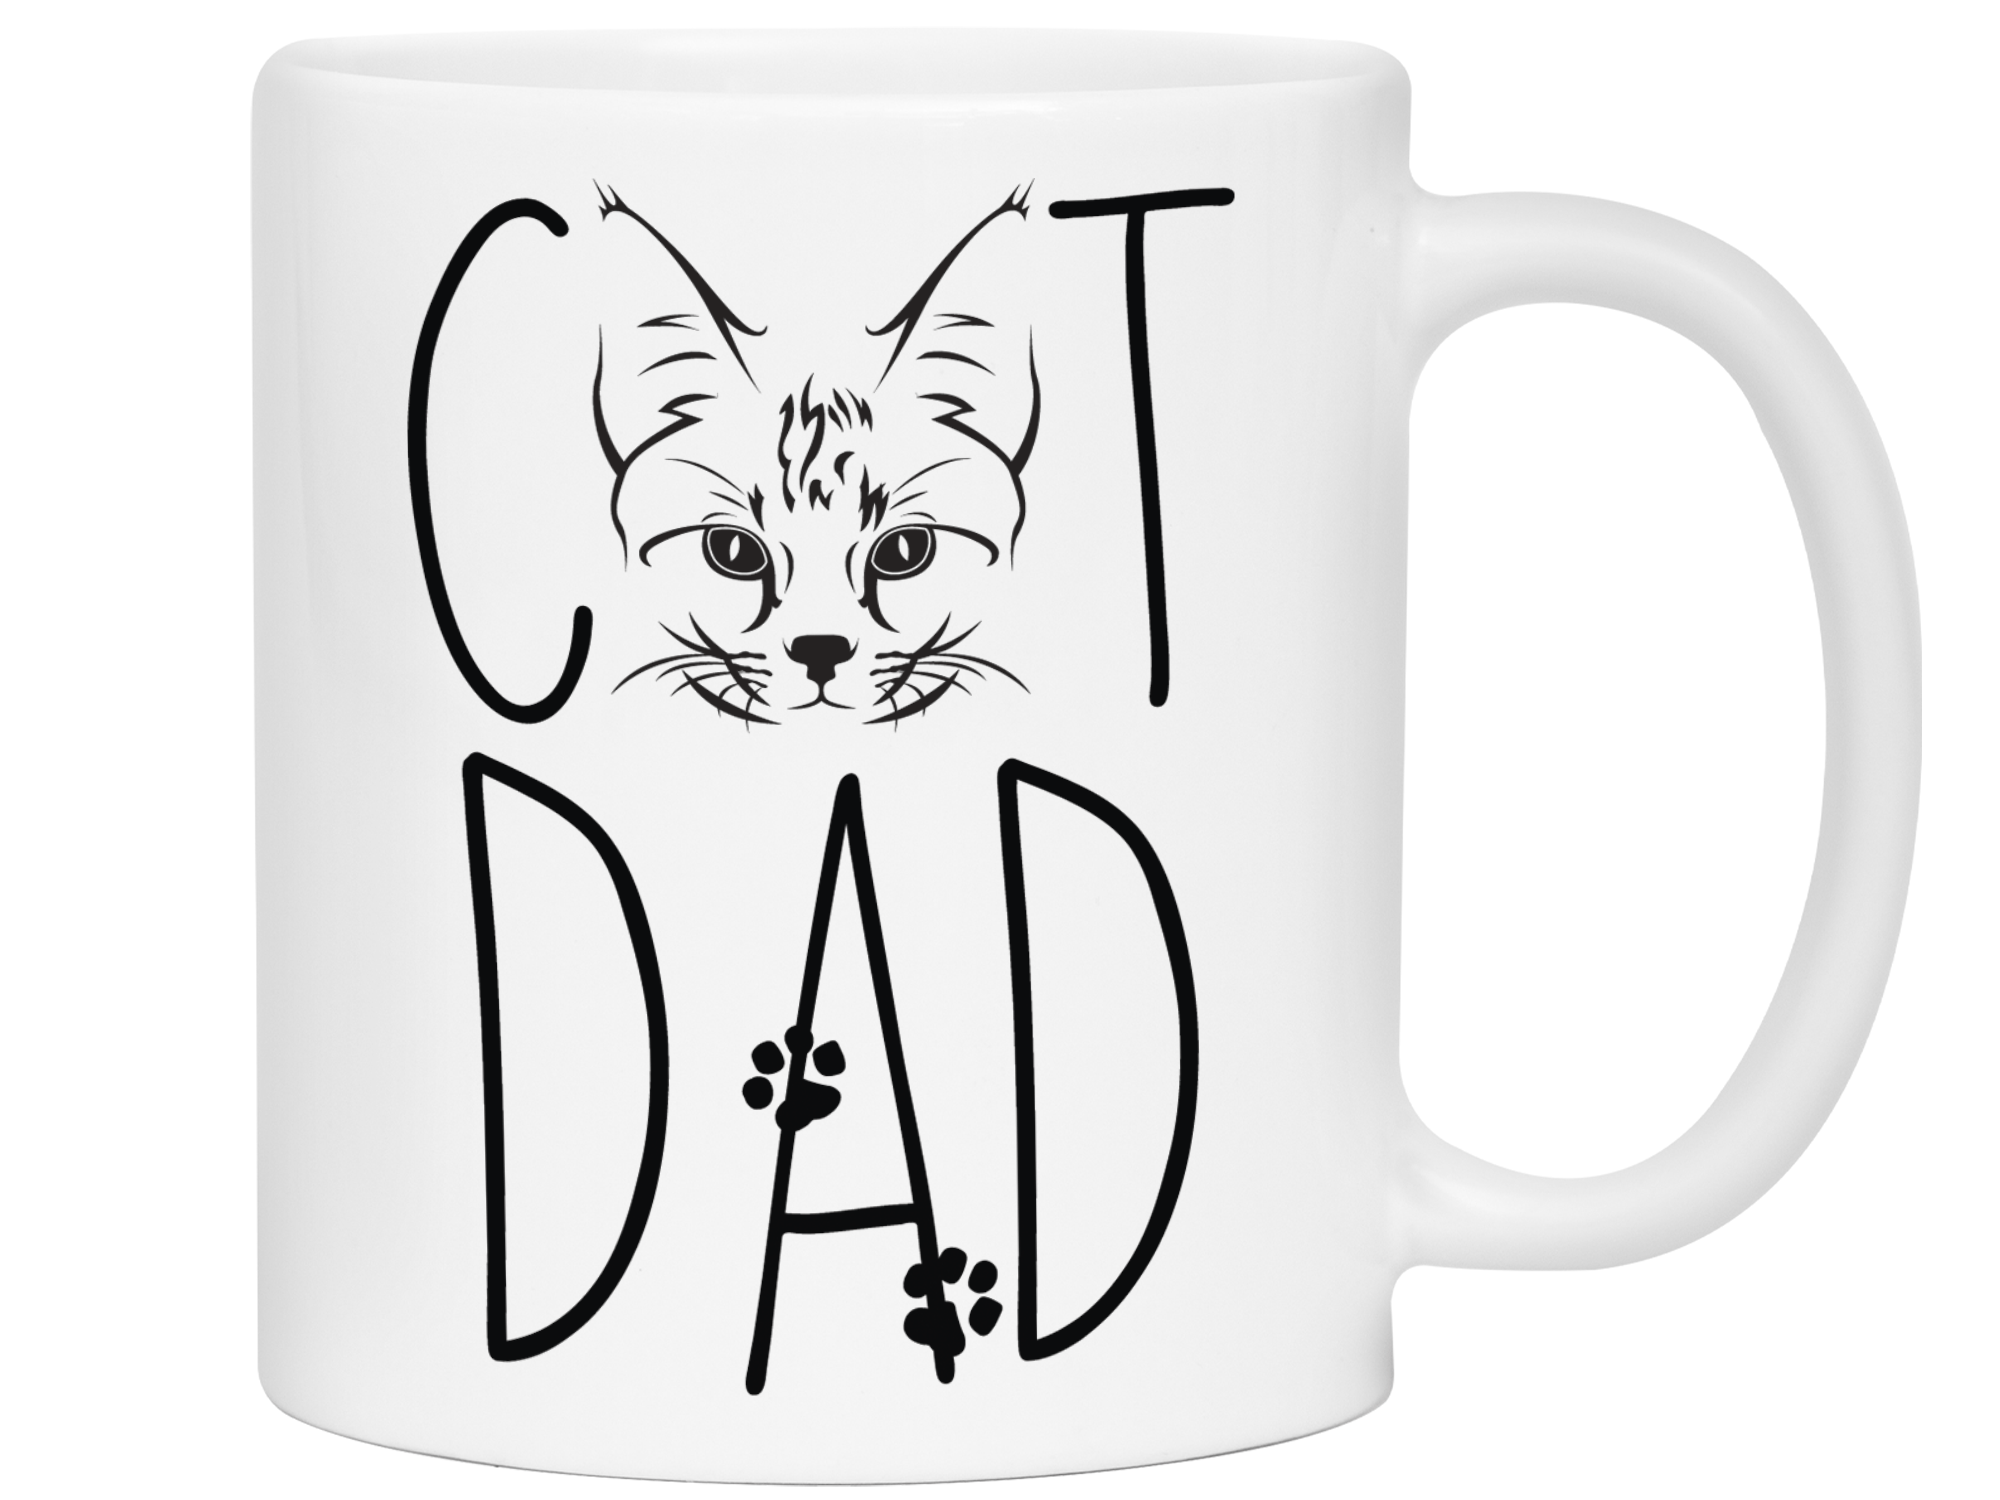 Cat Dad Gifts - Cat Dad Coffee Mug - Father's Day Gift Idea for Cat Dads